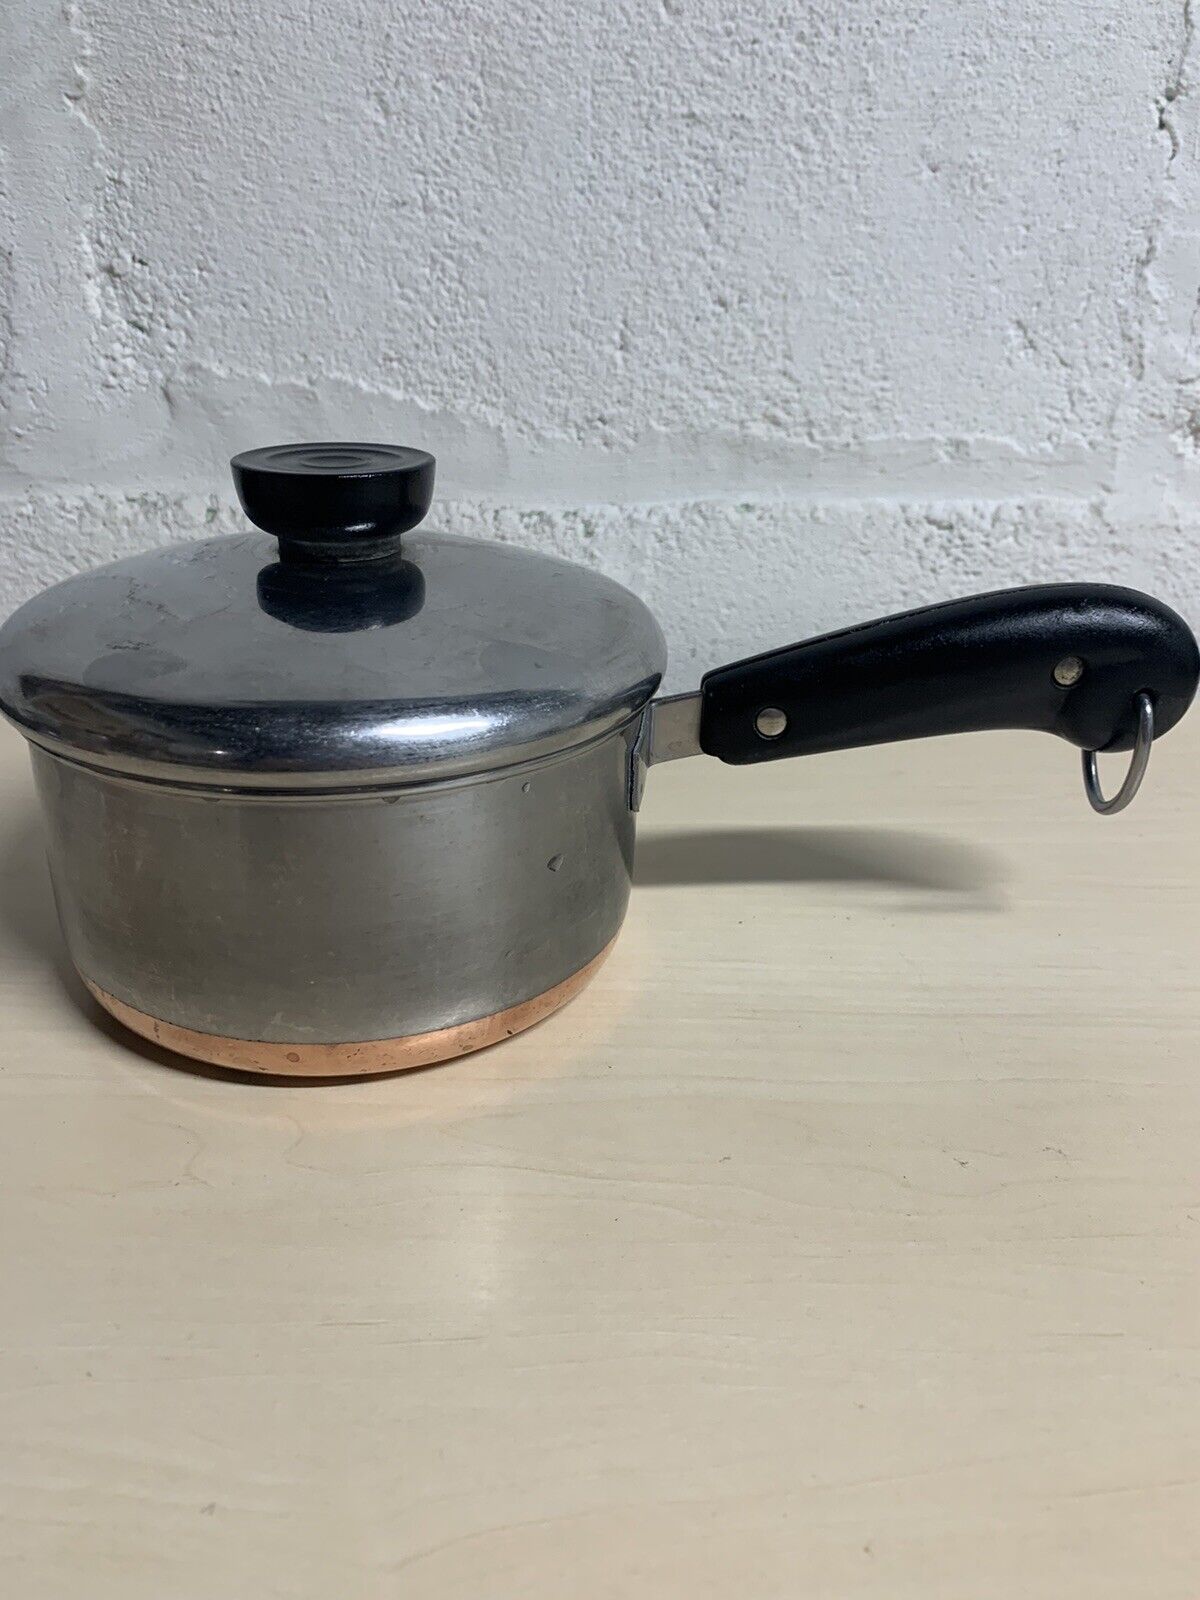 Pre 1968 Revere Ware 1 Qt Copper Clad Stainless Steel Sauce Pan w Lid